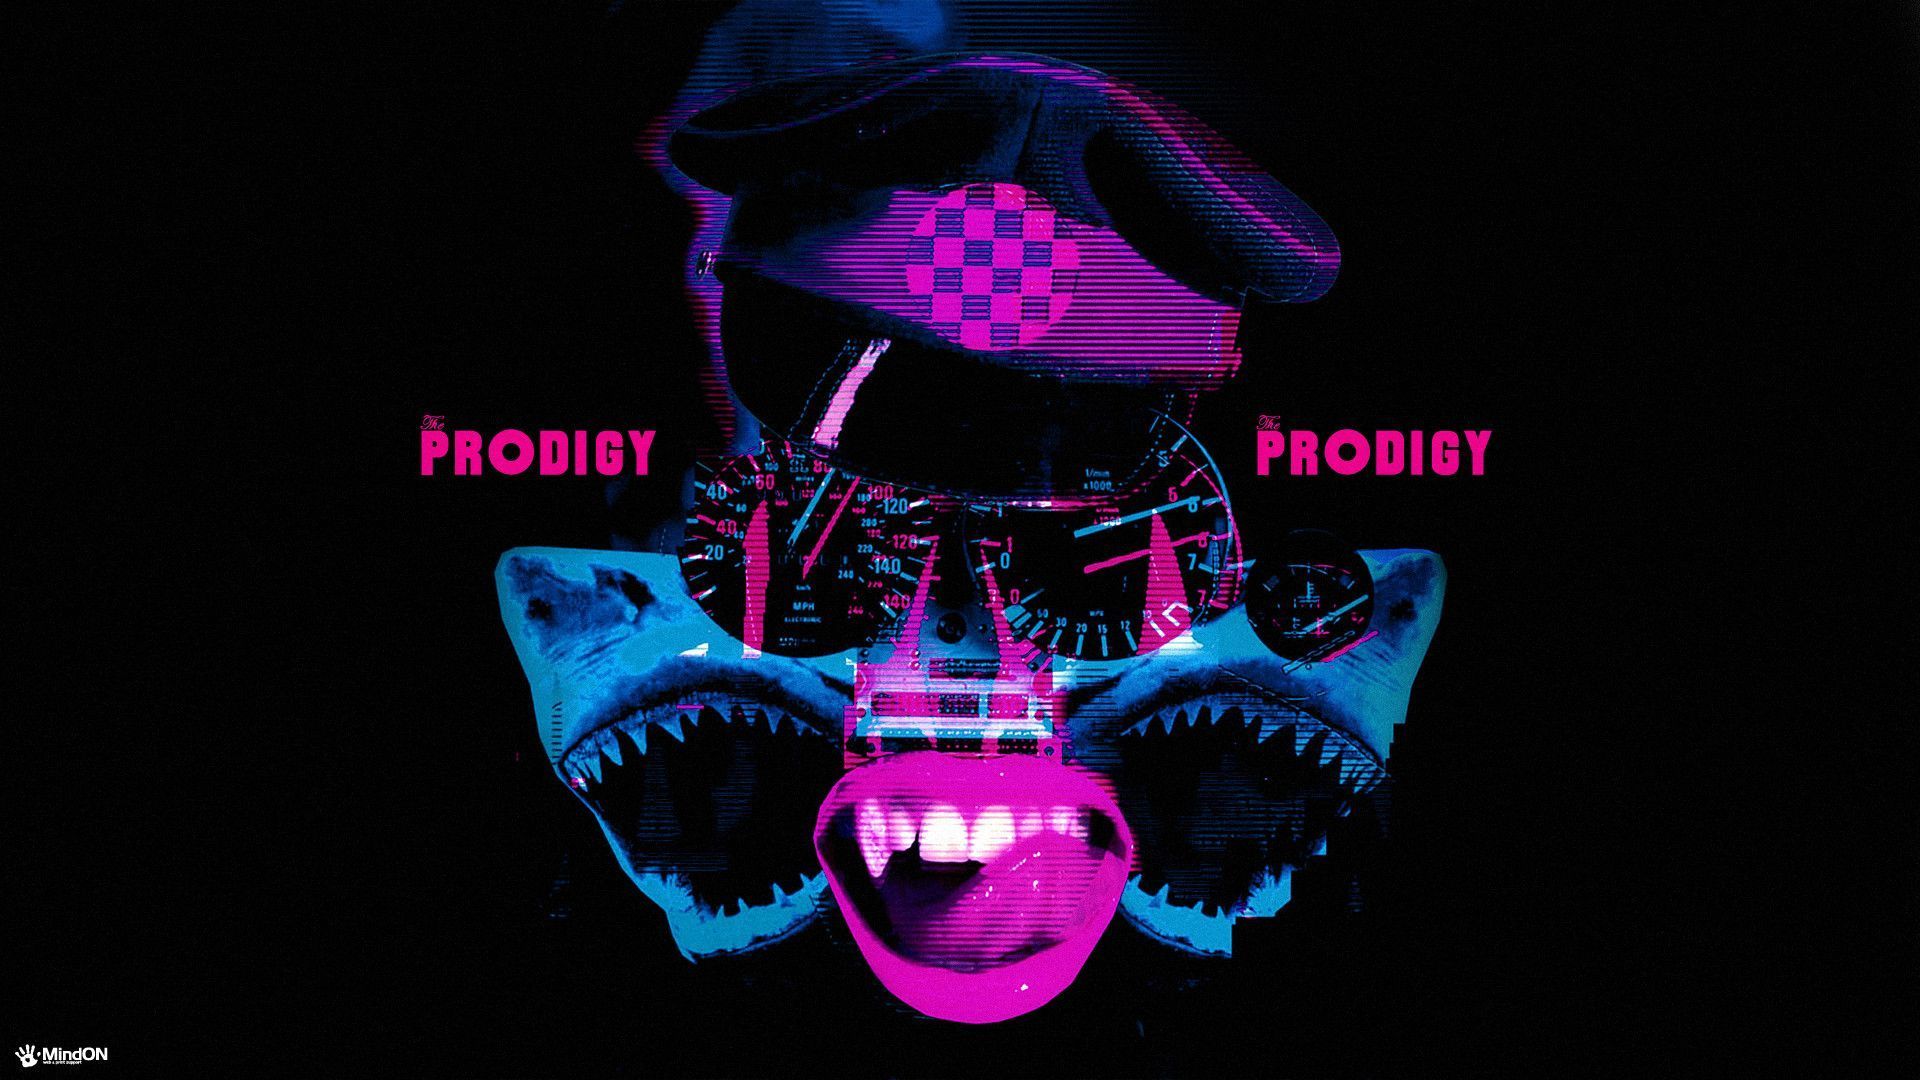 New Wallpapers Up For Download | The Prodigy Fanboy - Liam Howlett ...